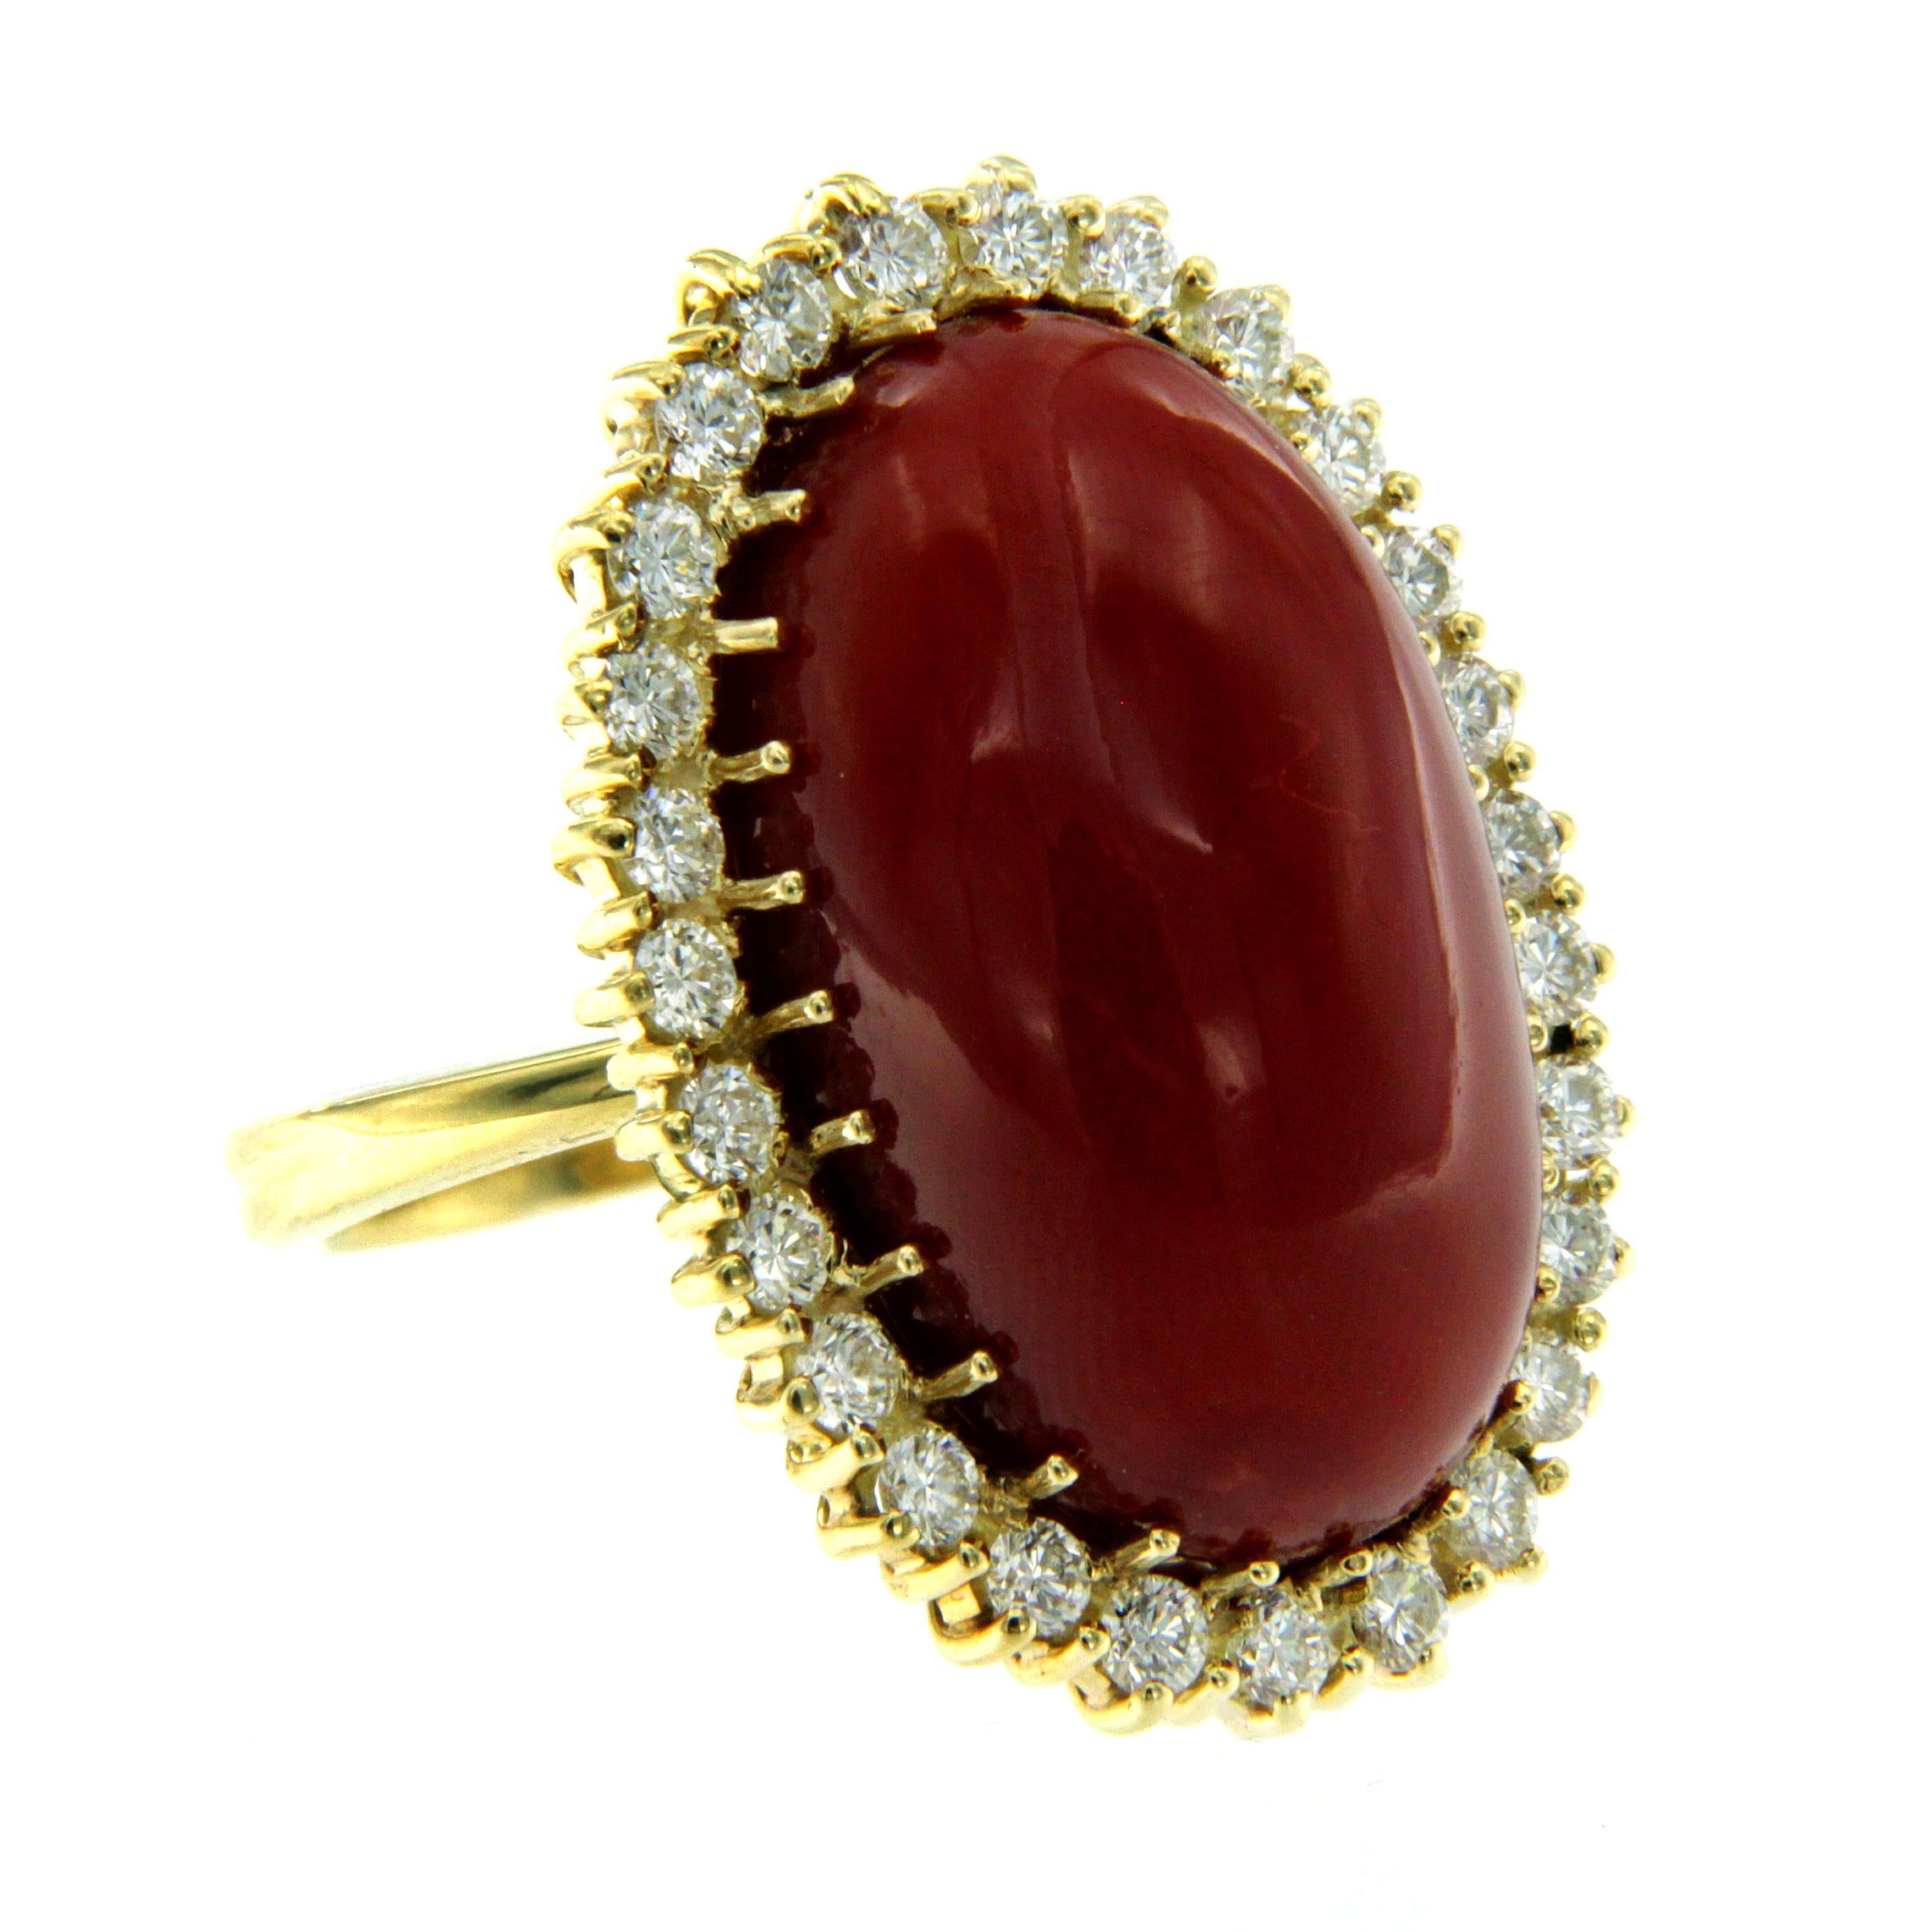 oxblood coral